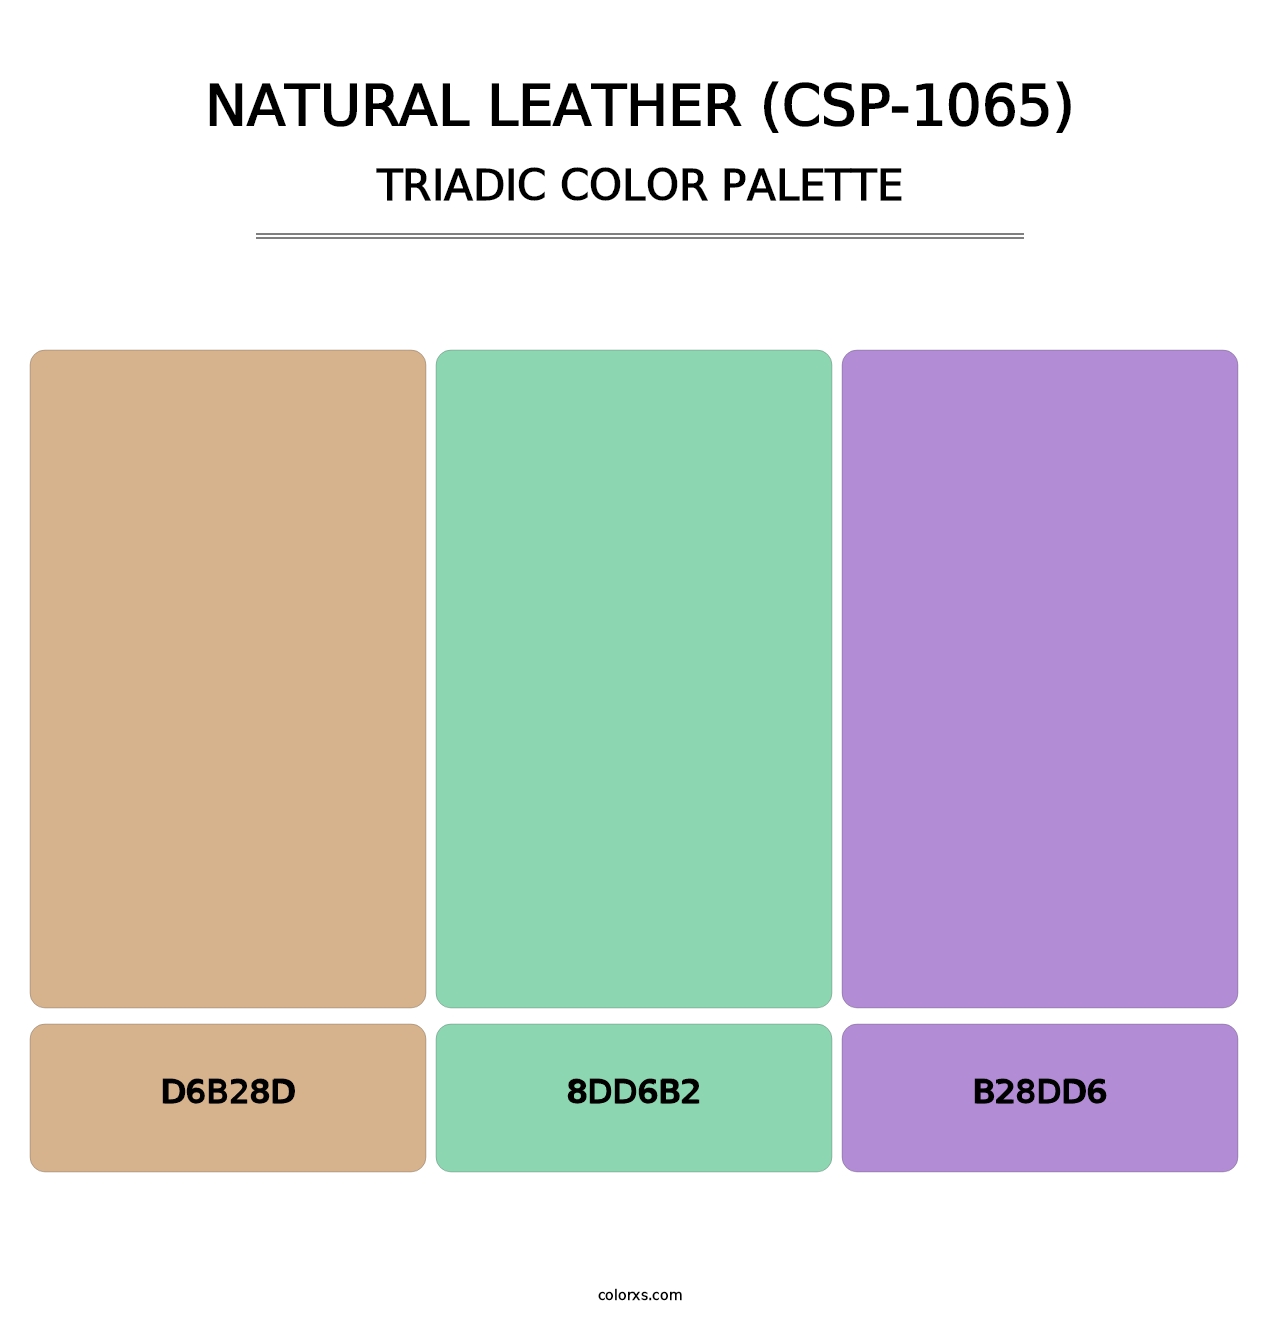 Natural Leather (CSP-1065) - Triadic Color Palette